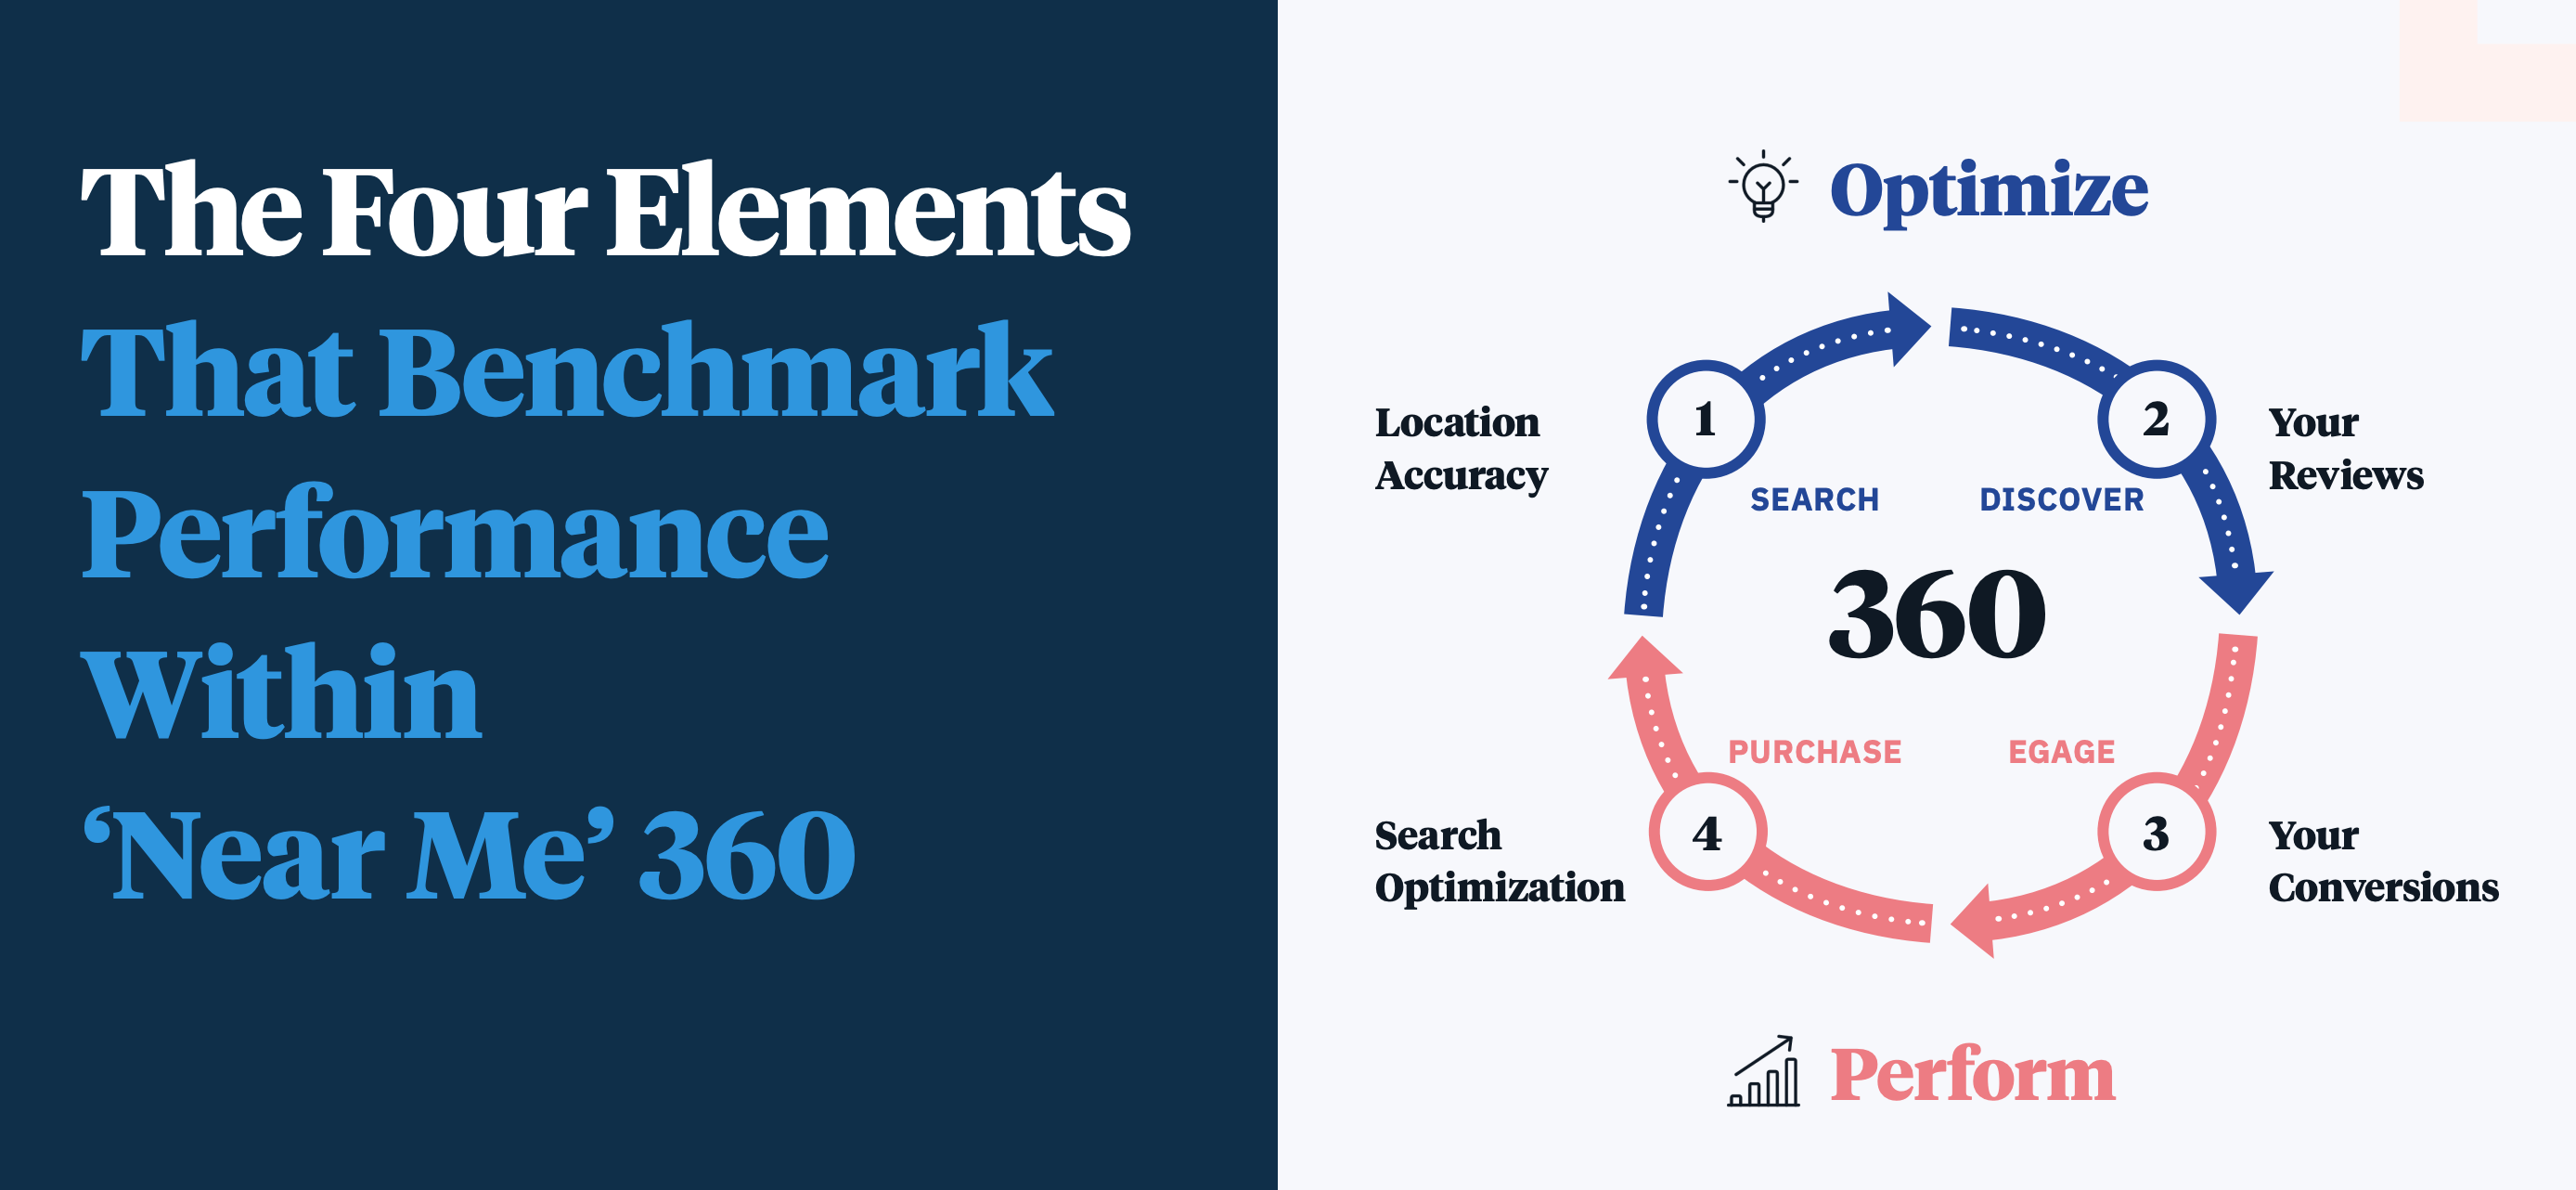 benchmark performance with 'Near Me' 360